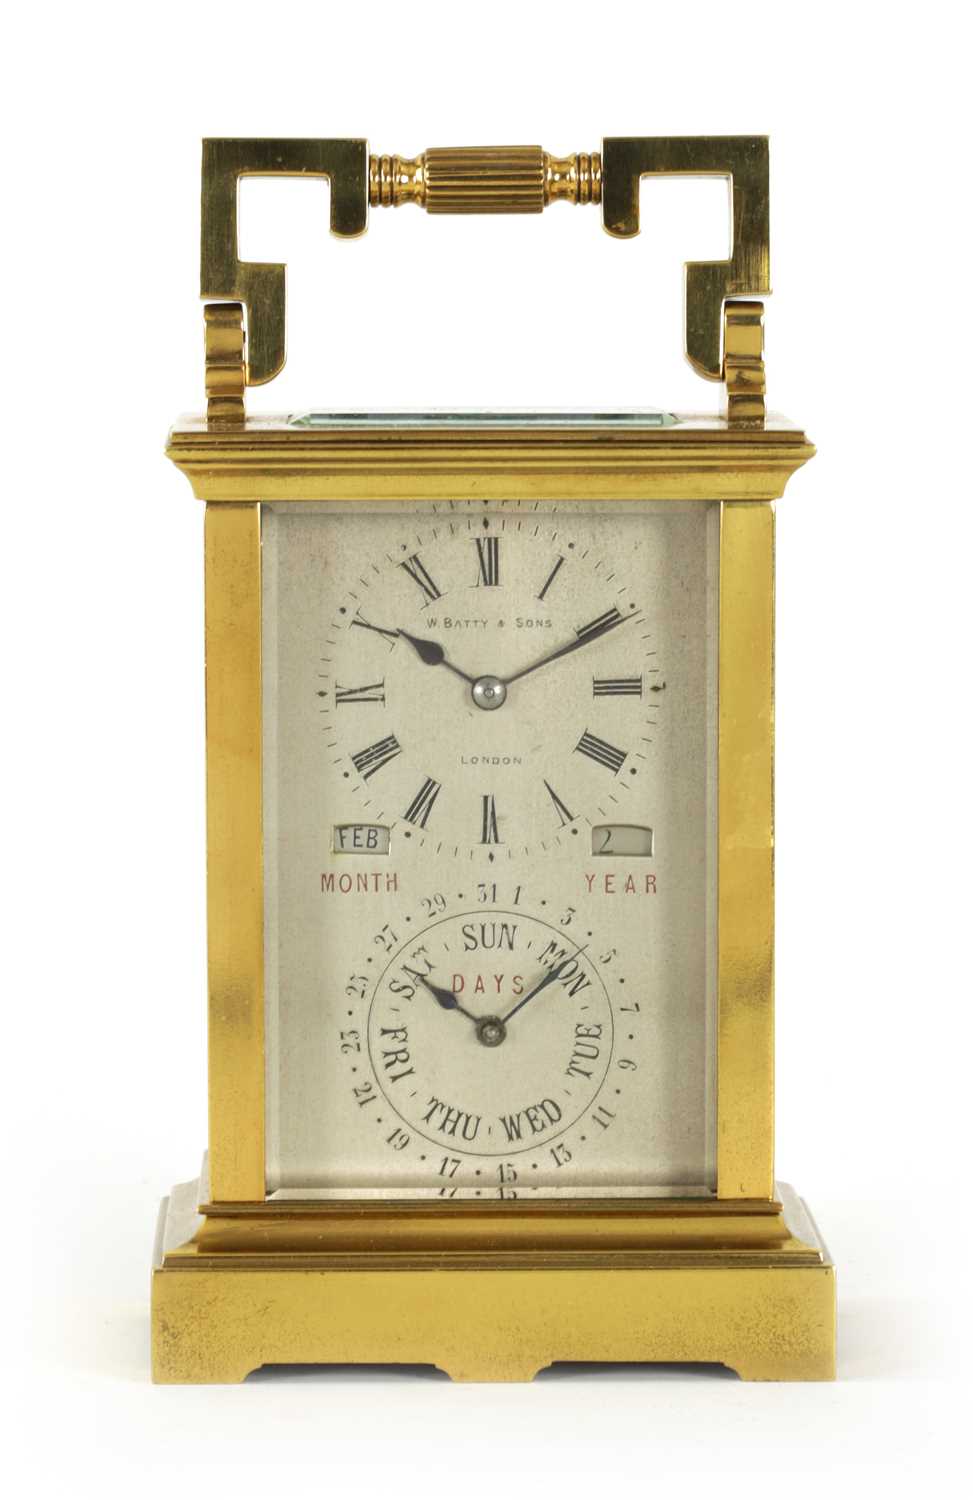 W. BATTY, LONDON. A VERY RARE LATE 19TH CENTURY FRENCH LACQUERED BRASS CARRIAGE CLOCK TIMEPIECE WIT